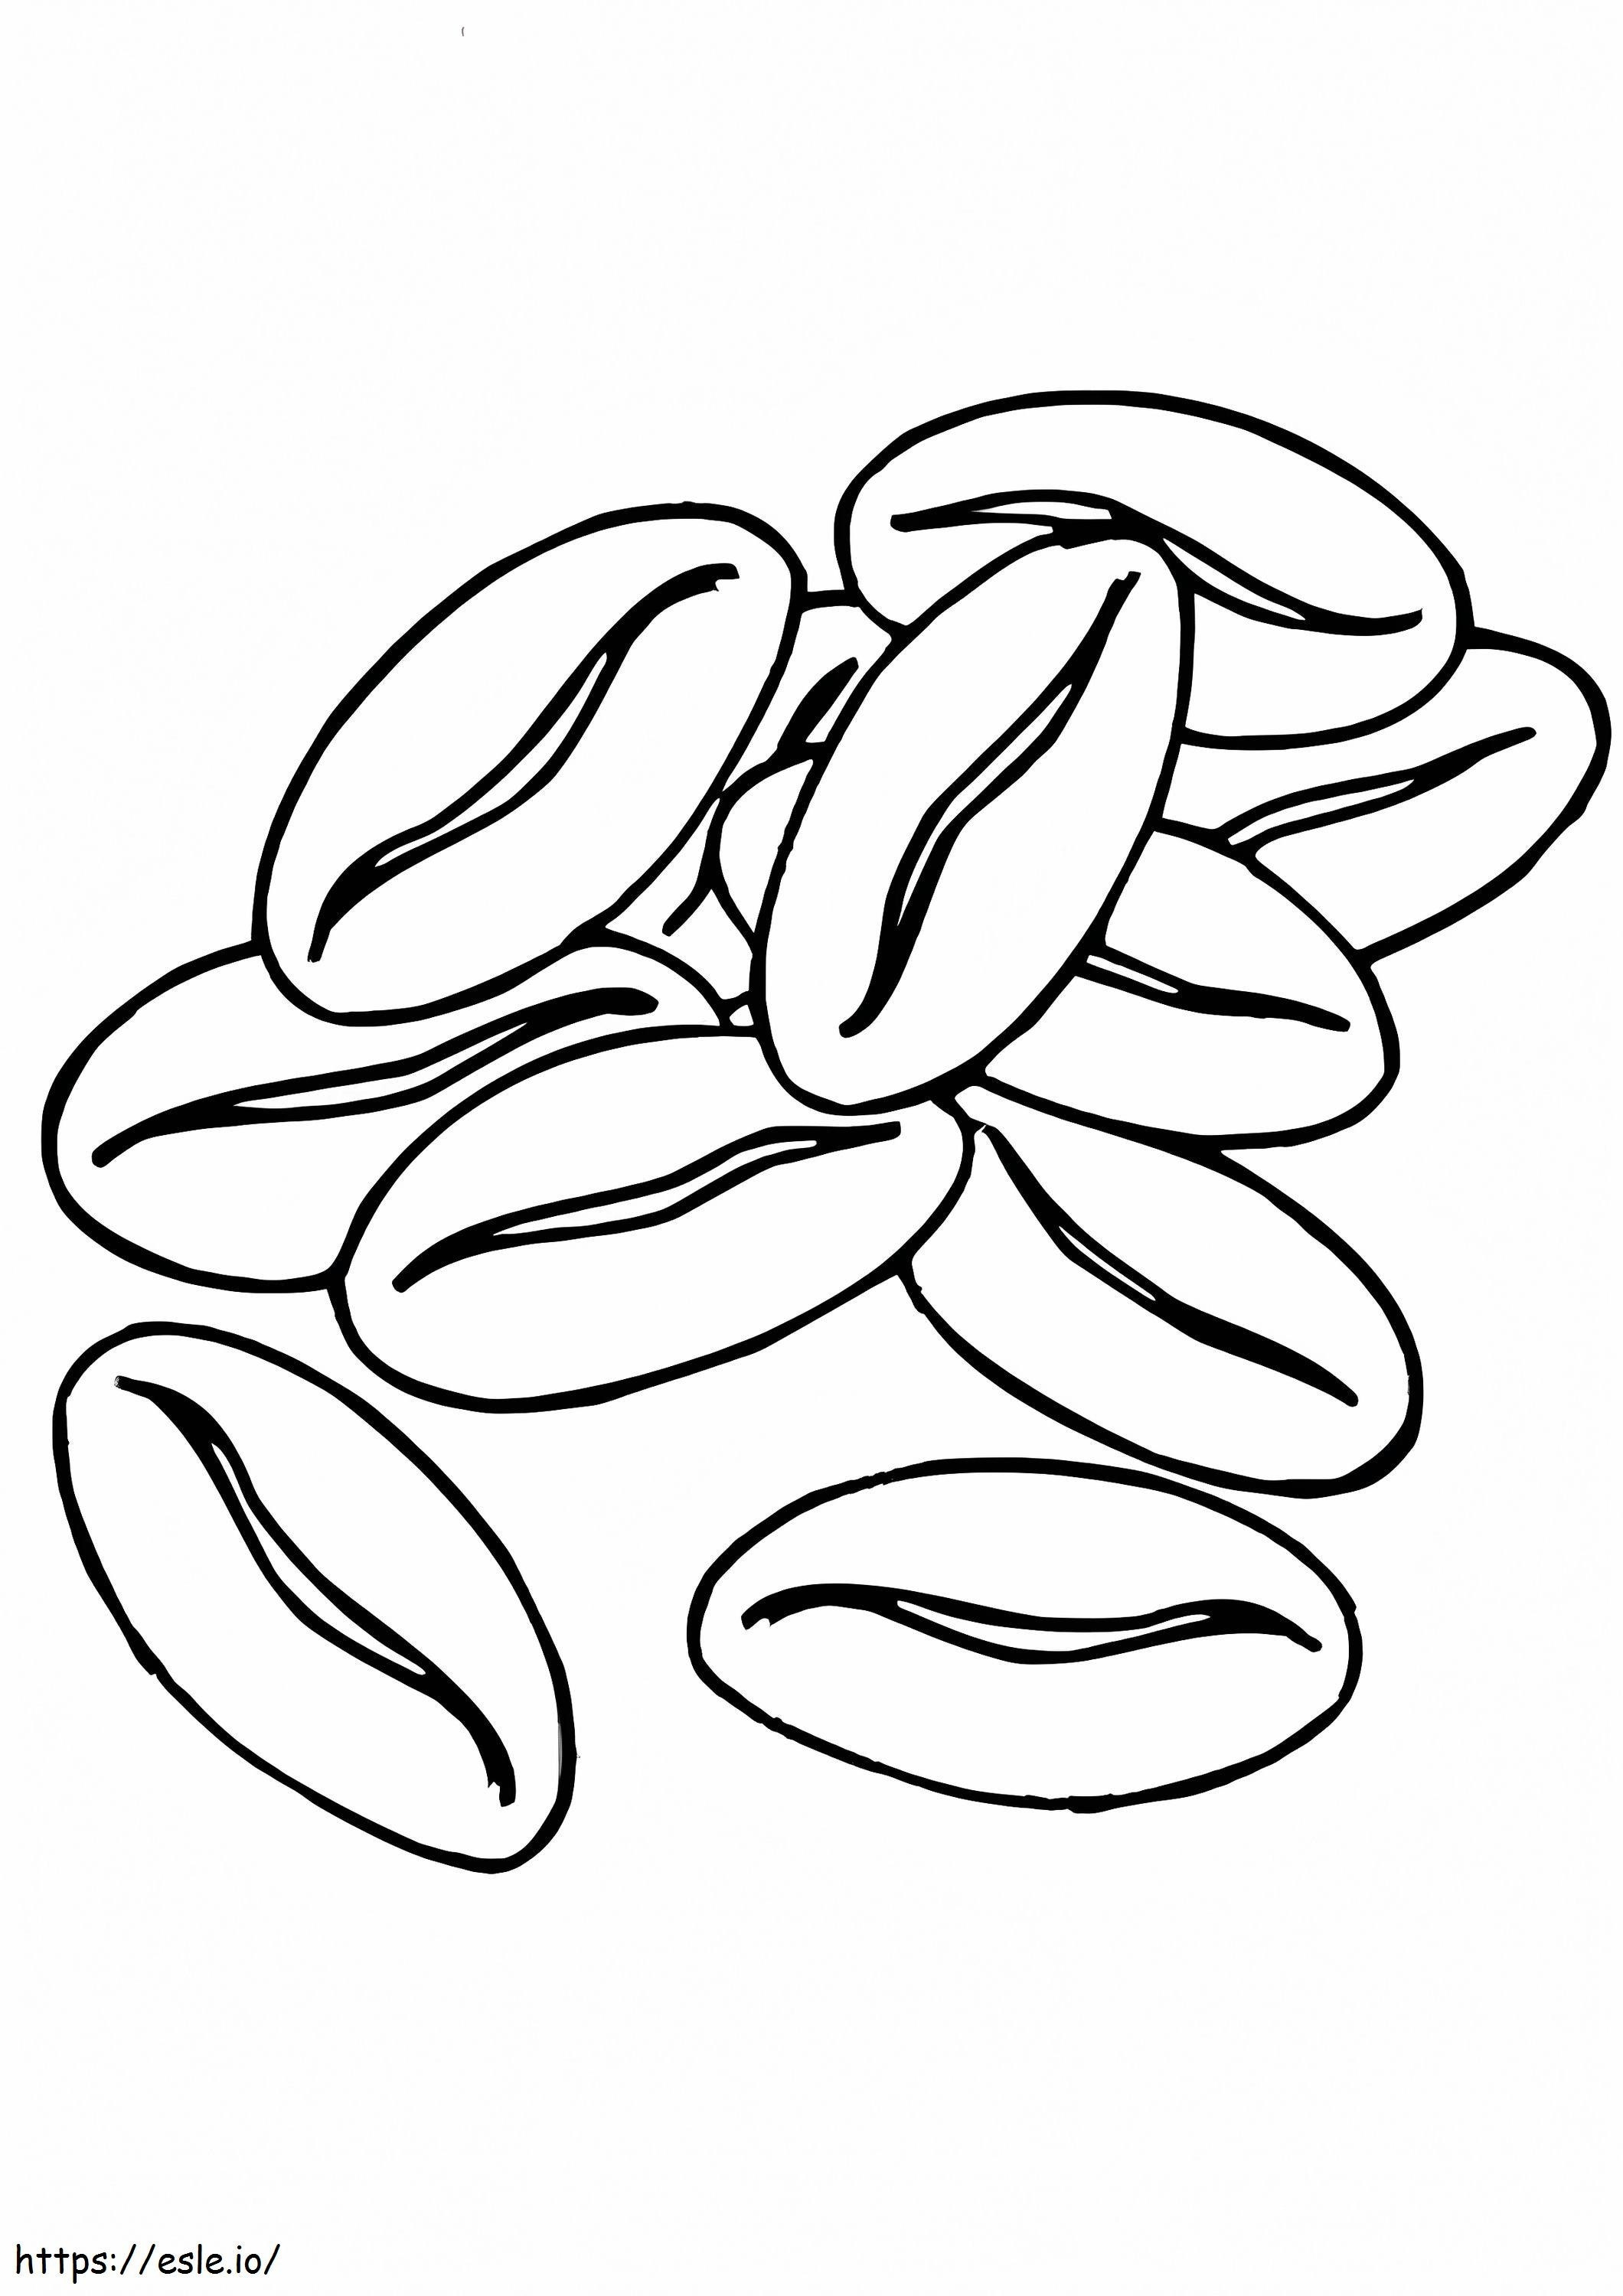 Great Beans coloring page